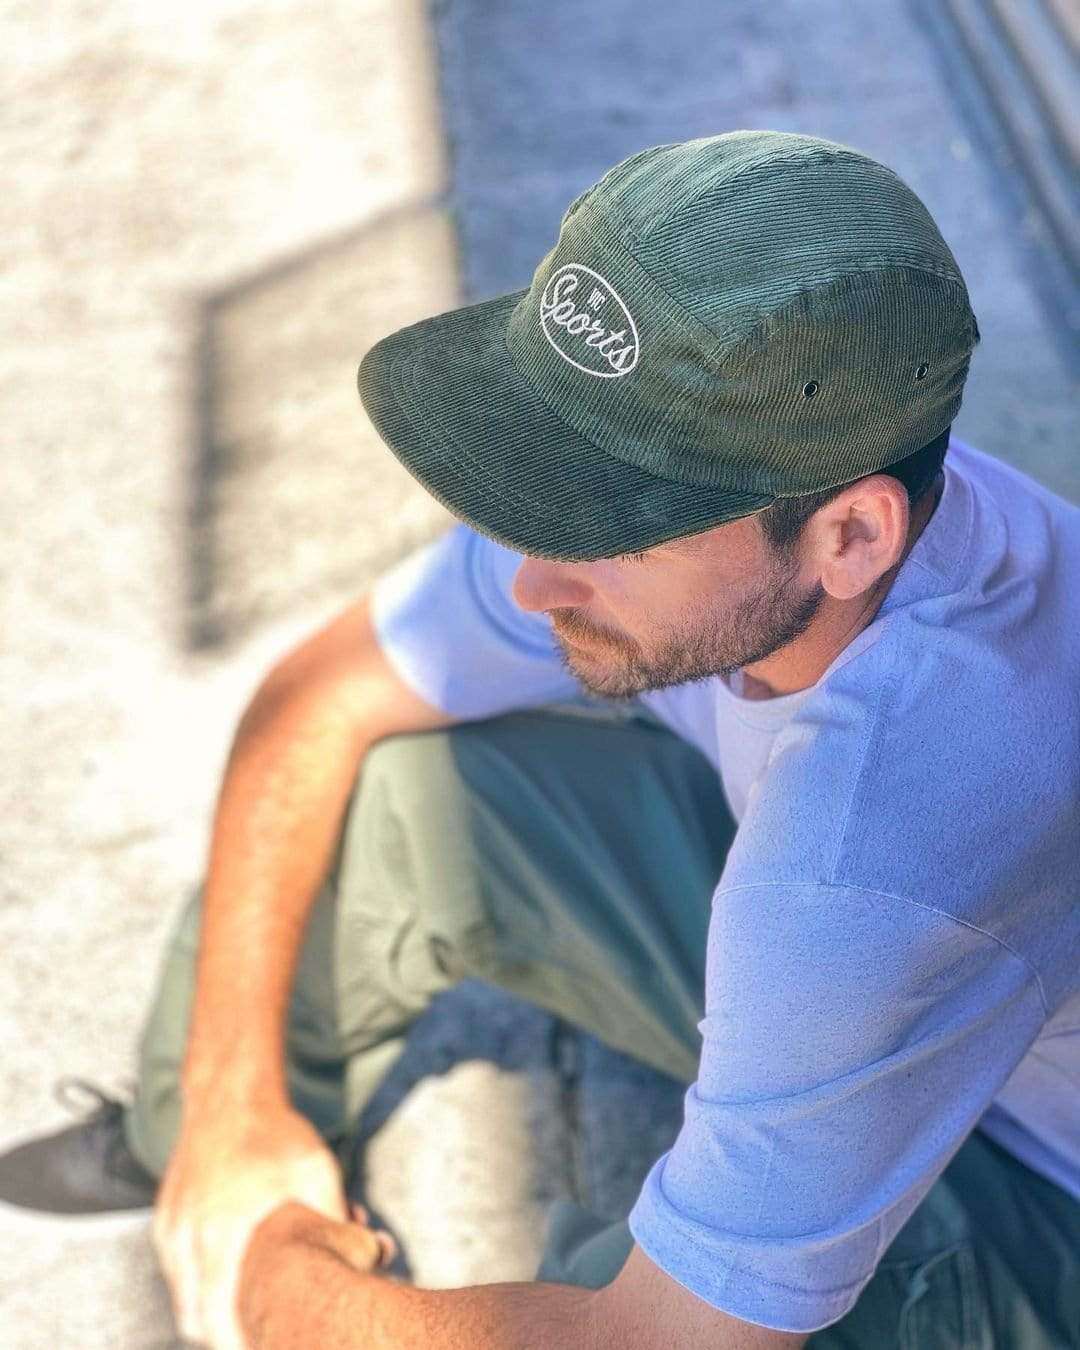 Premium quality corduroy 5-panel camp hat by New Zealand skate and streetwear clothing label VIC Apparel. Embroidered logo. Classic vintage camp cap style, hand made in New Zealand.